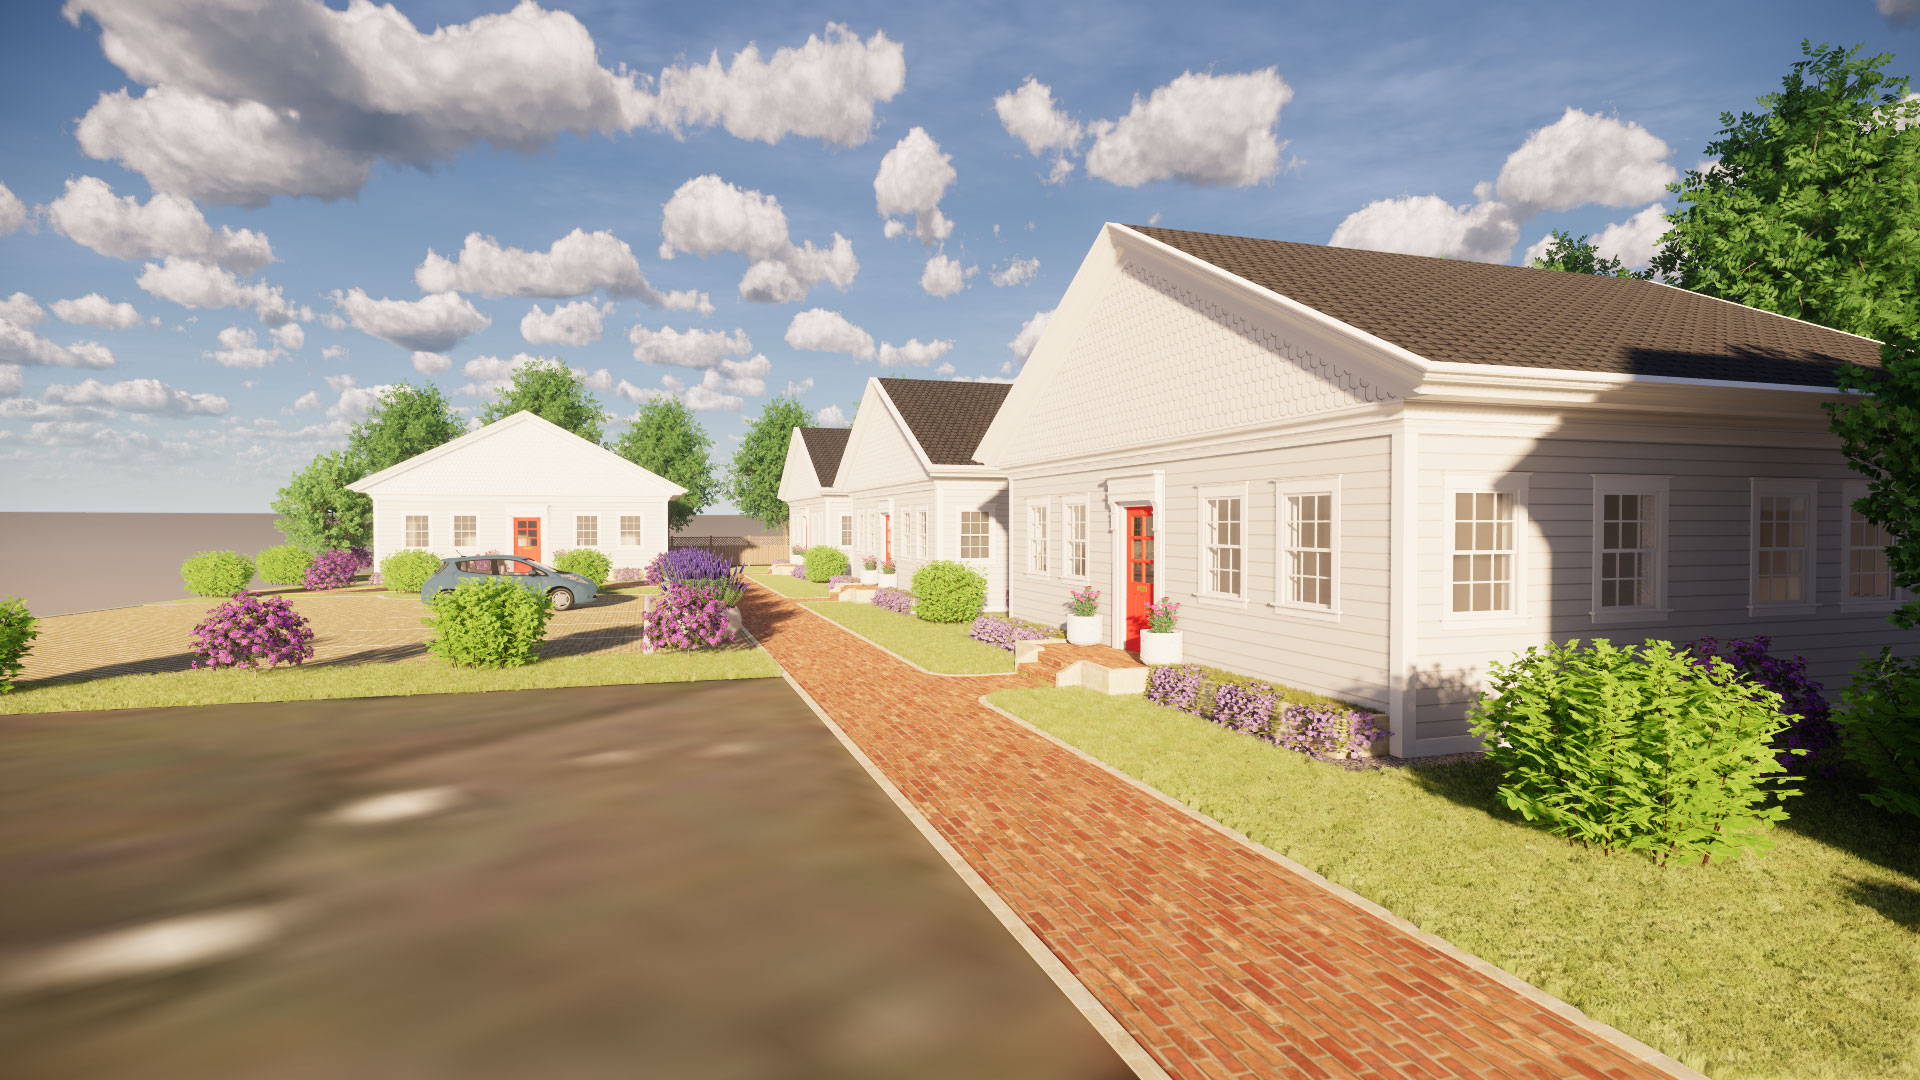 Closeup exterior render of line of 4 houses along brick path, blue sky and clouds above.